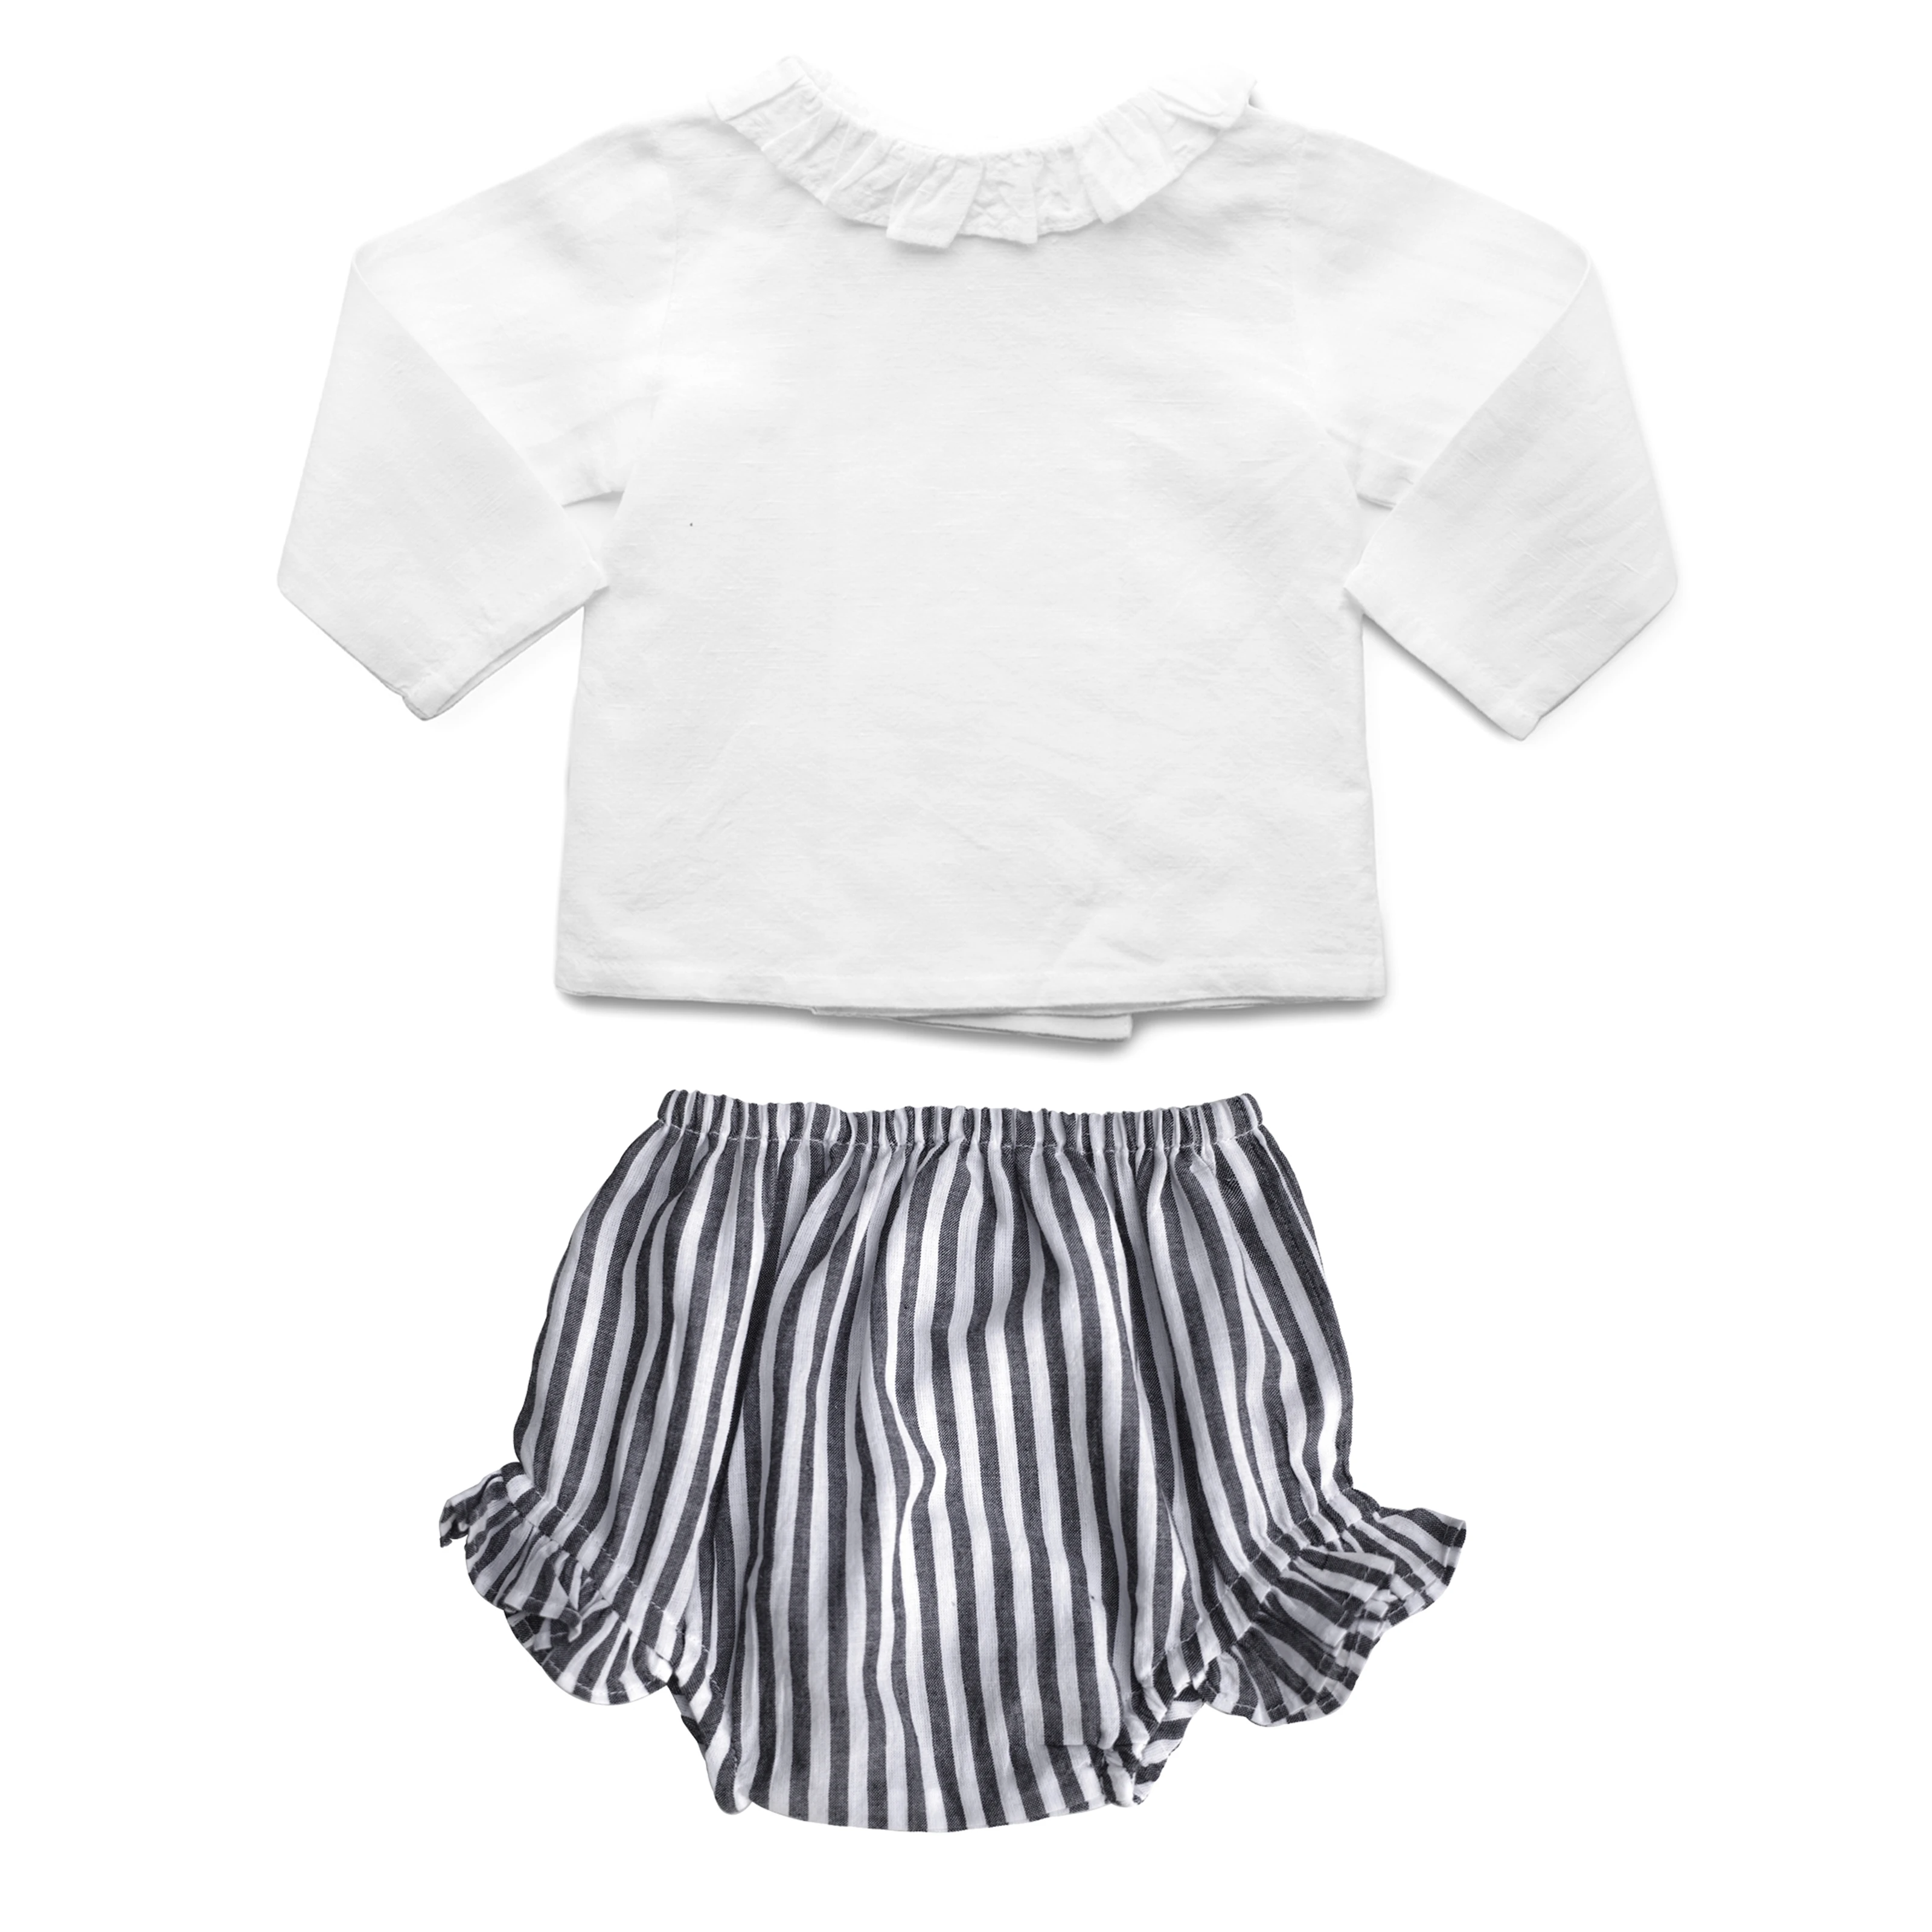 Louelle Gift set | Double Button Blouse & Harbor Island Stripe Frill Bloomer